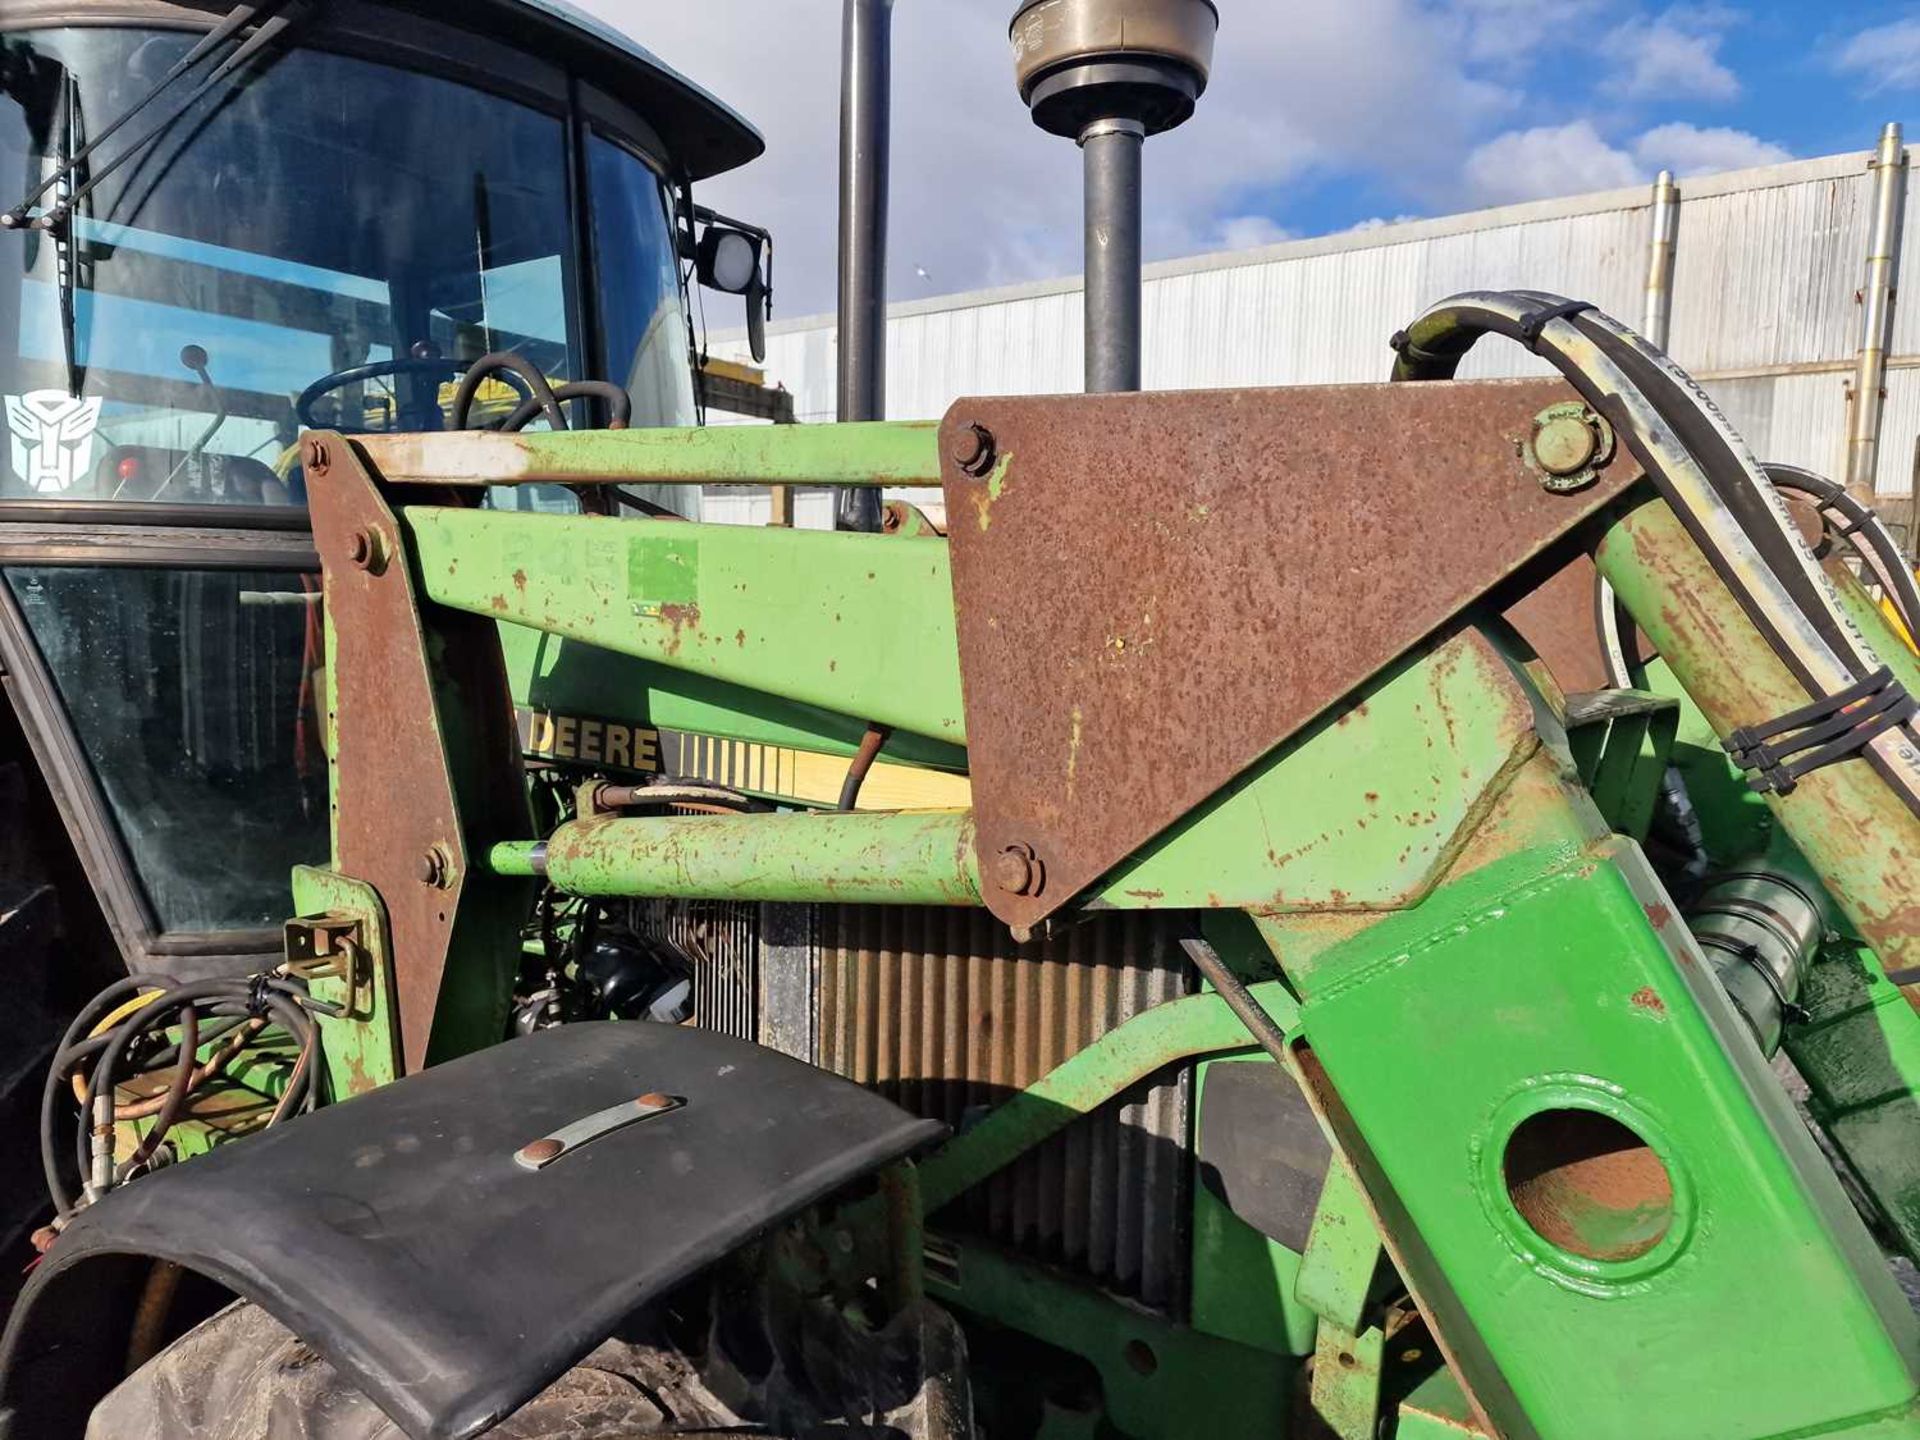 1989 John Deere 2850 4WD Tractor, Loader, 2 Spool Valves, Push Out Hitch (Reg. Docs. Available) - Image 9 of 25